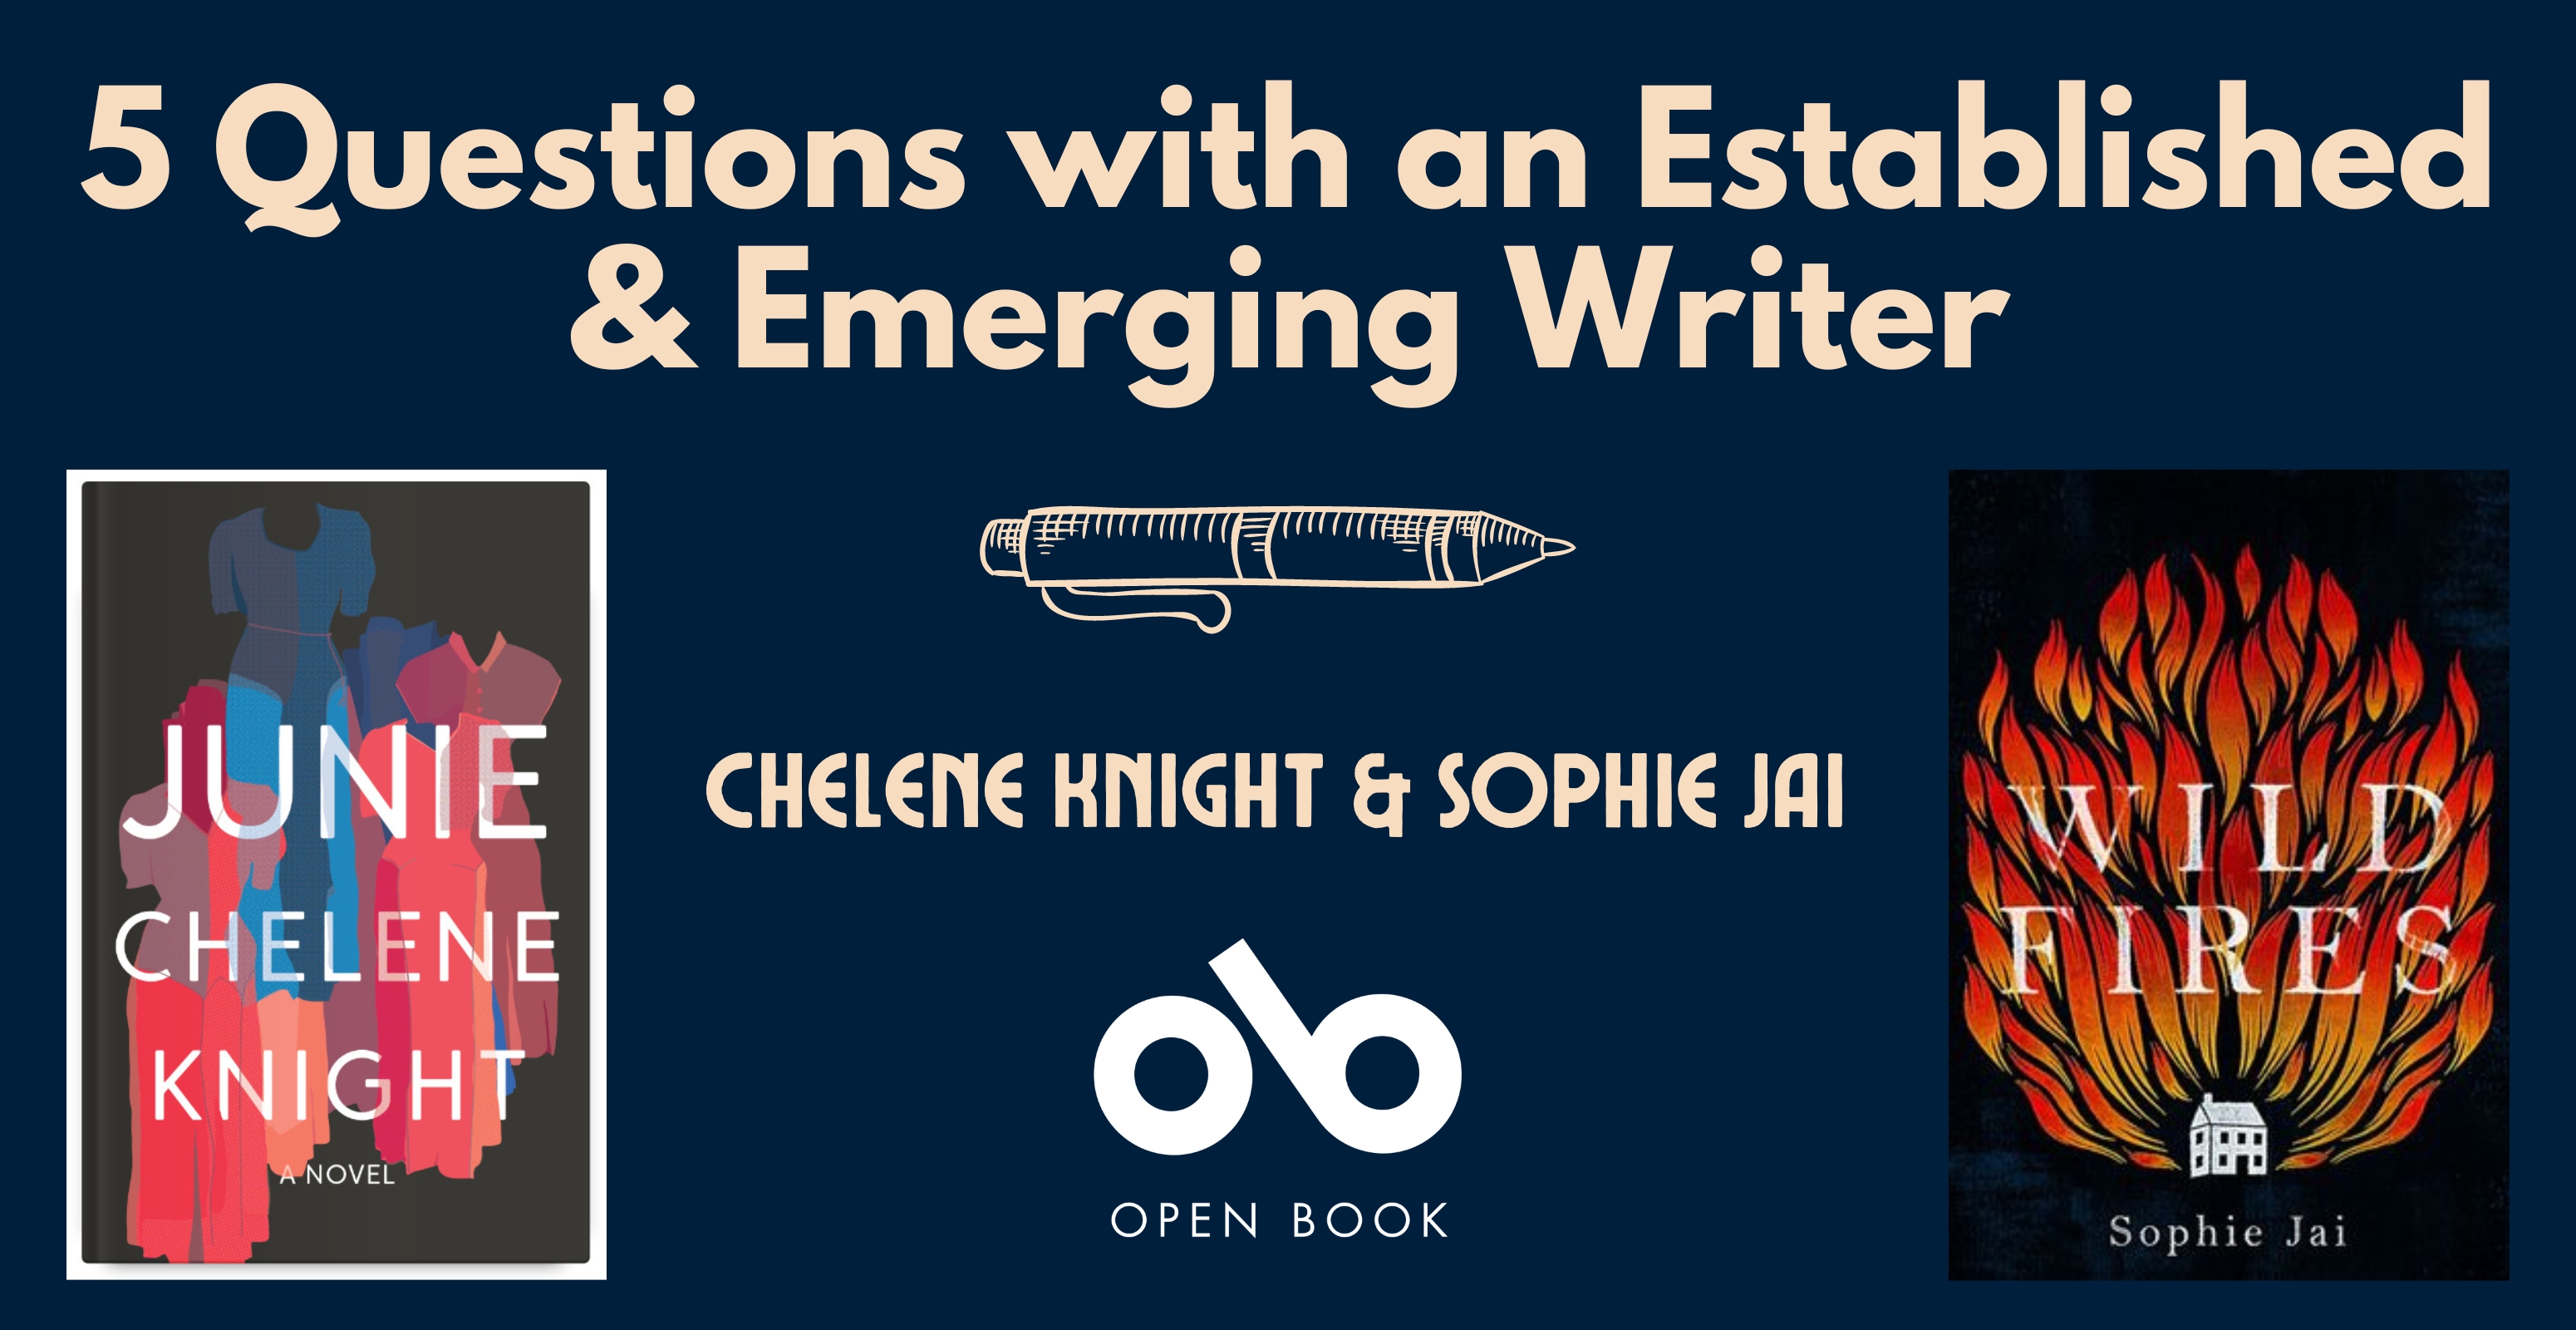 Chelene Knight and Sophie Jai - 5 Questions (3)